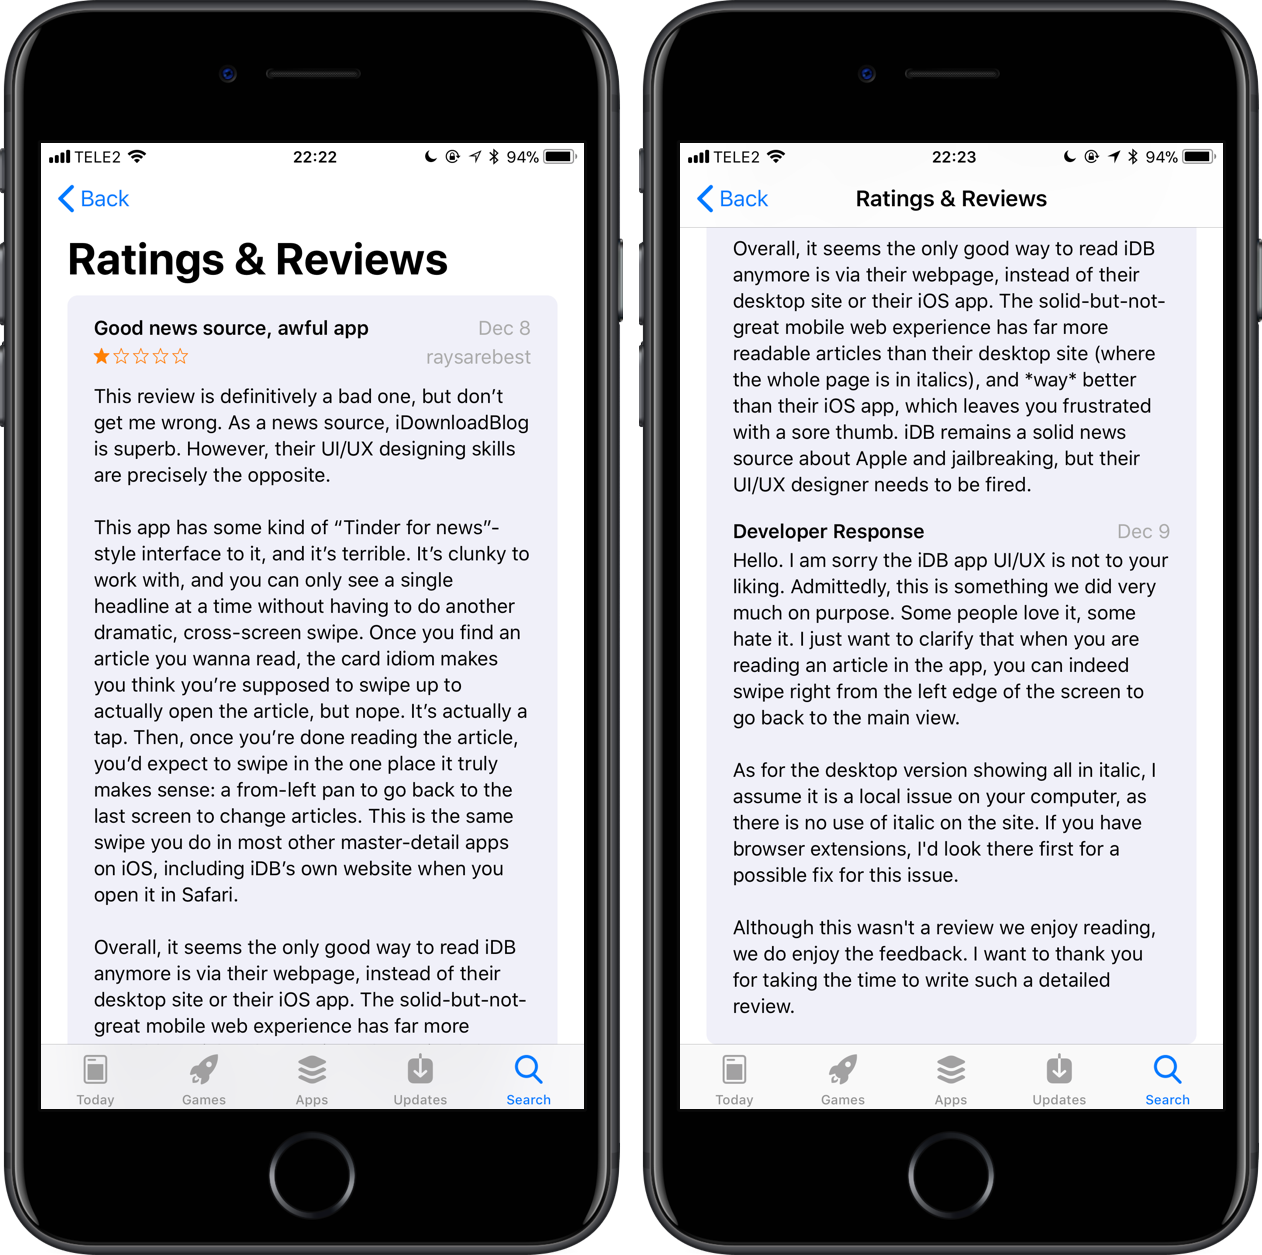 How to designate reviews in App Store as “Helpful” or “Not Helpful”